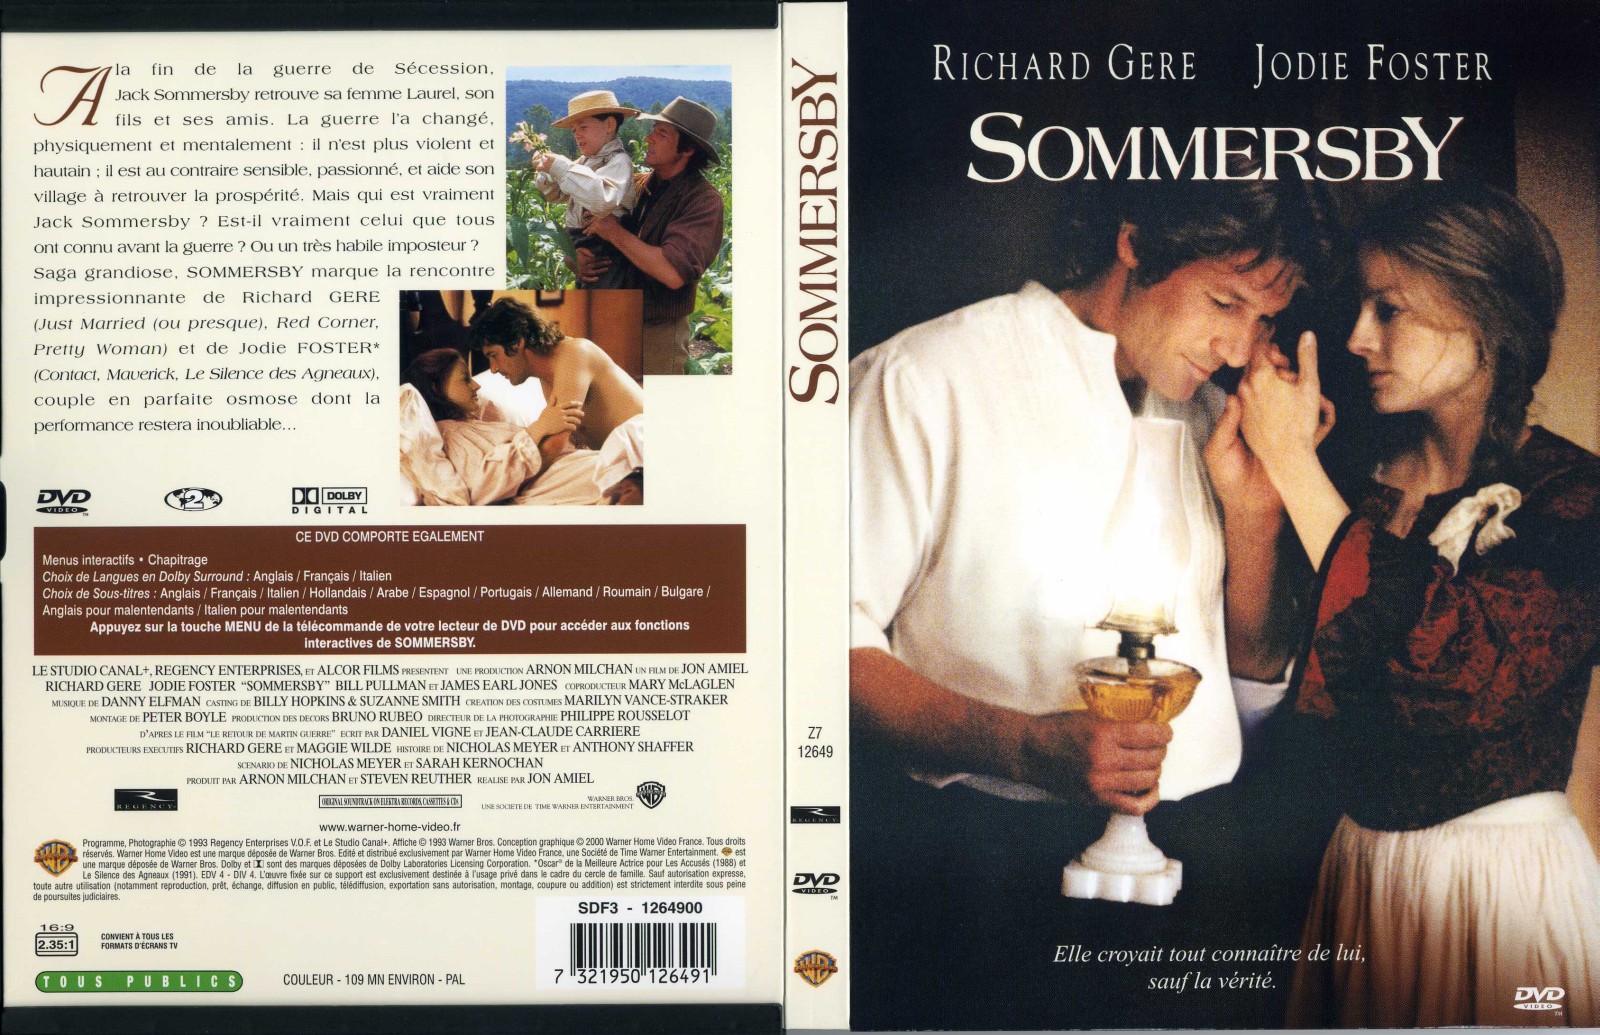 Jaquette DVD Sommersby